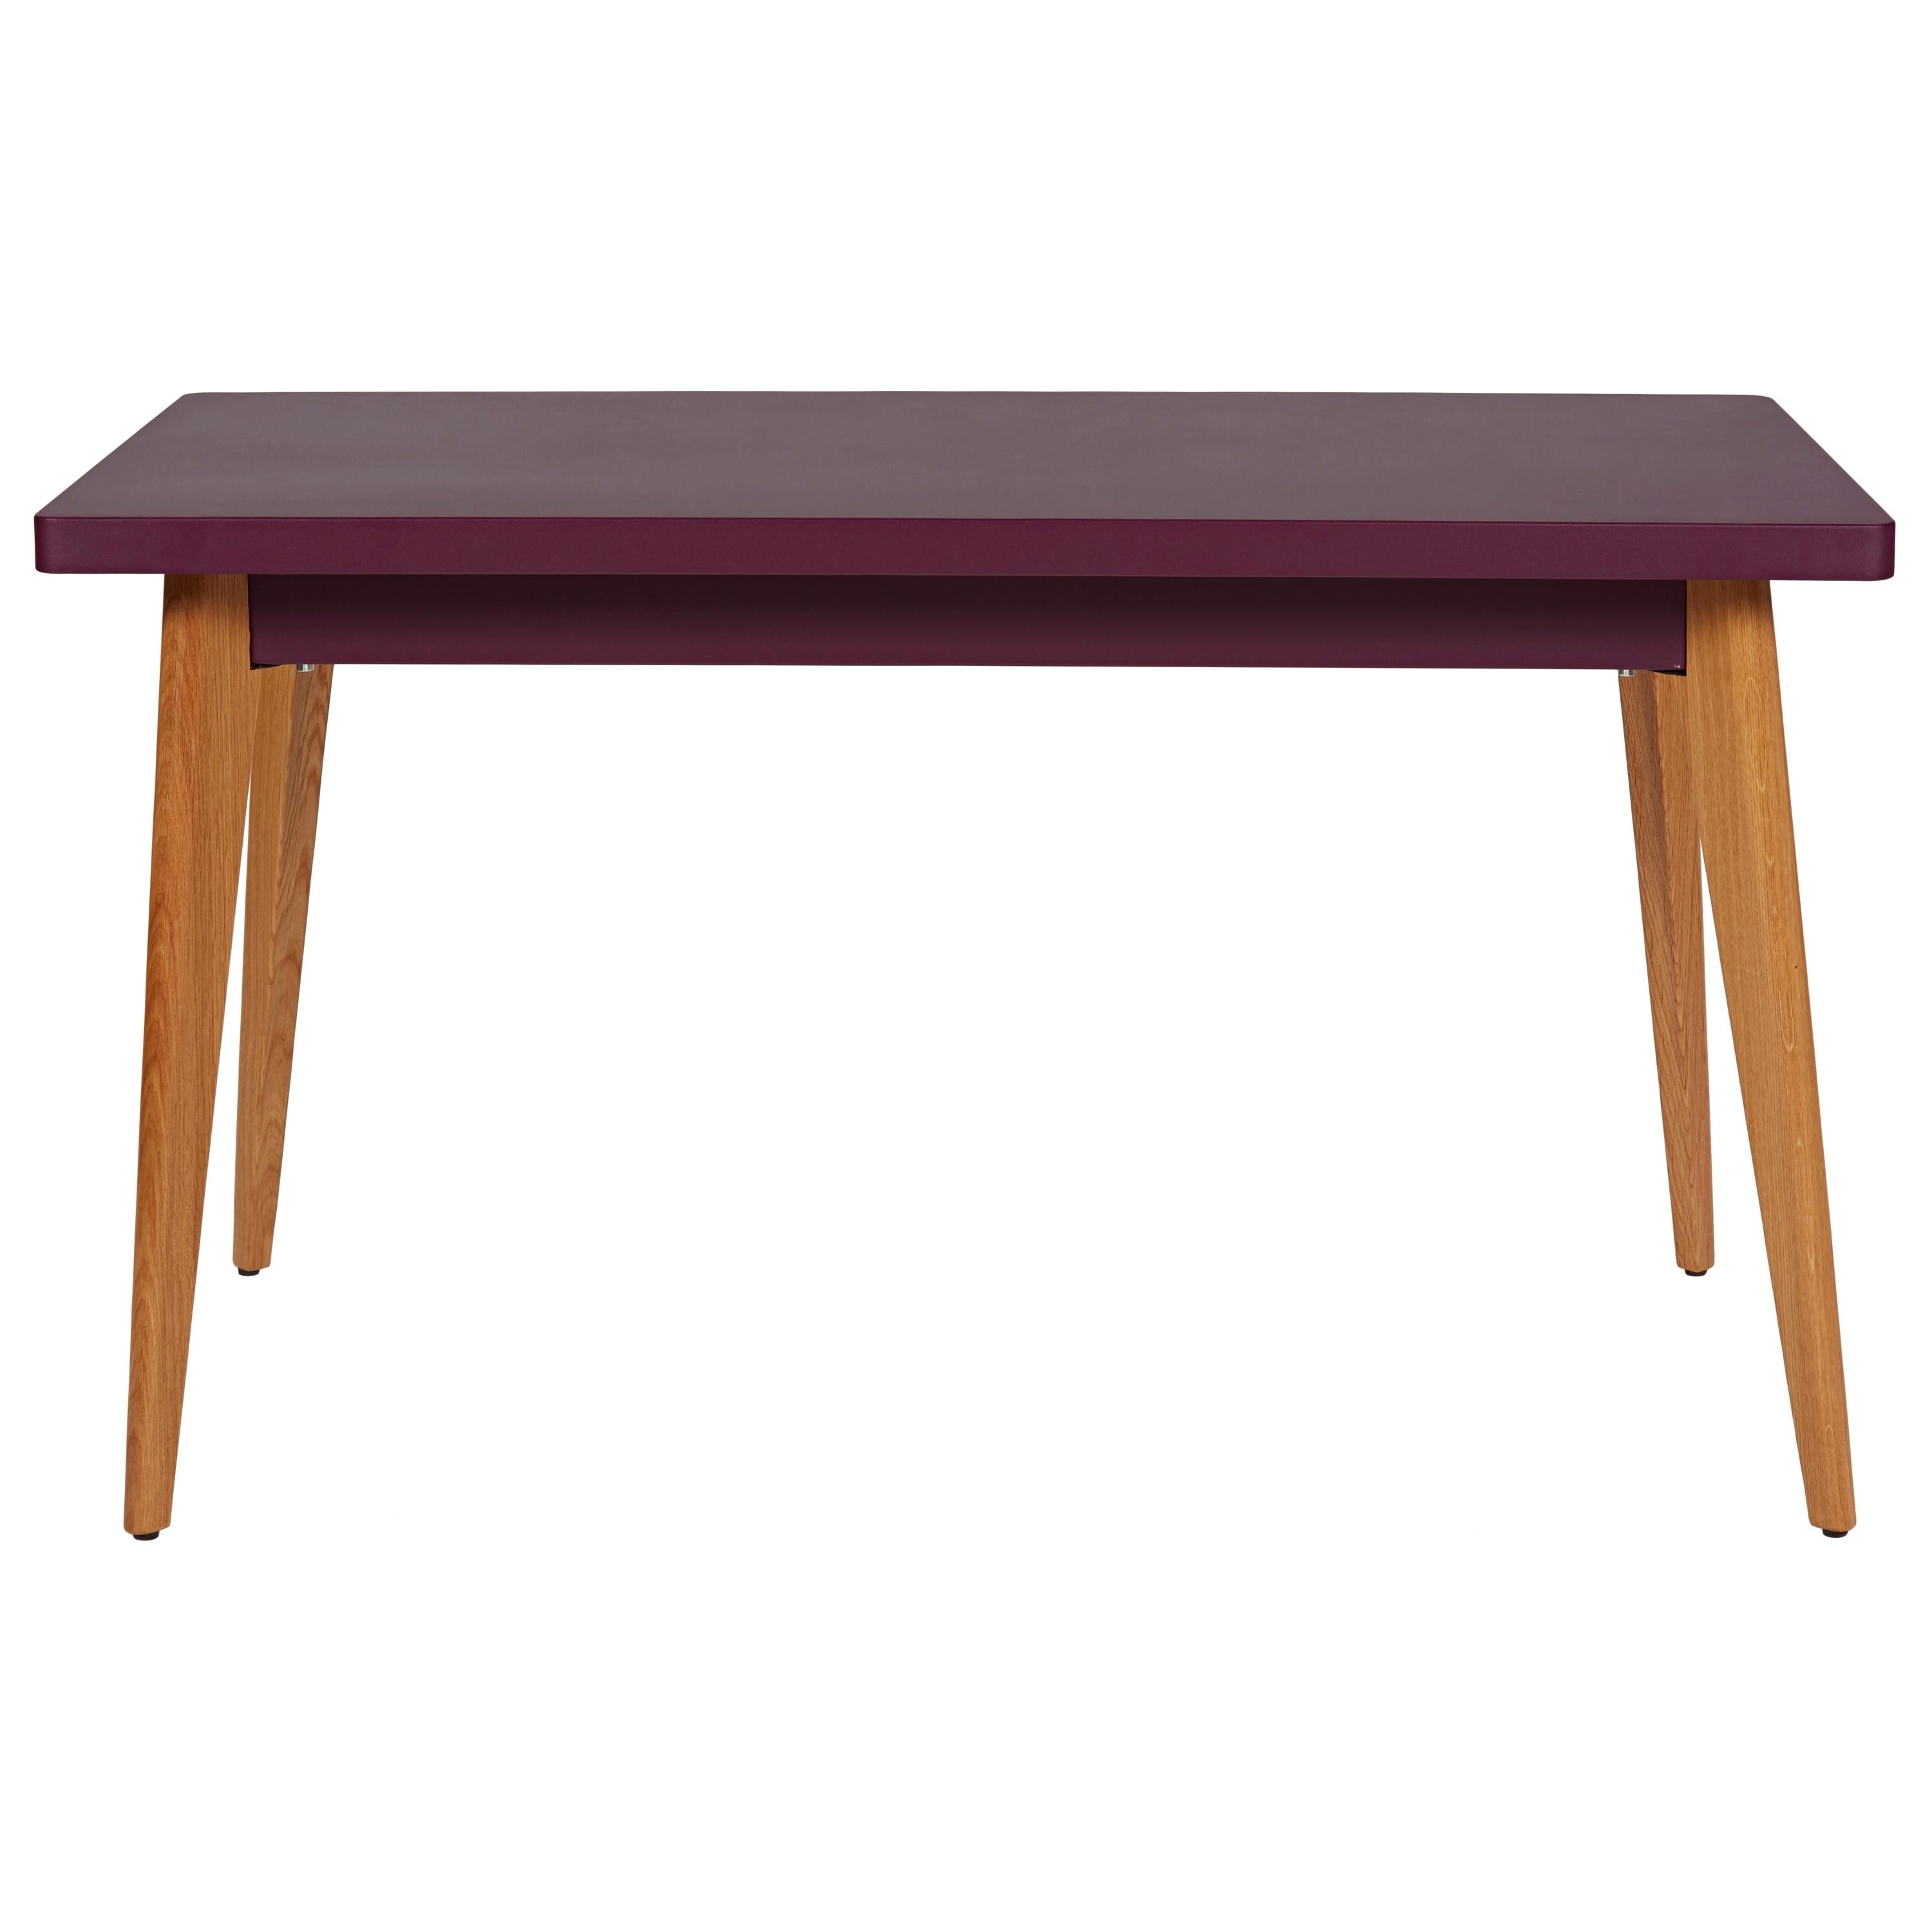 For Sale: Purple (Aubergine) 55 Small Table with Wood Legs in Pop Colors by Jean Pauchard & Tolix